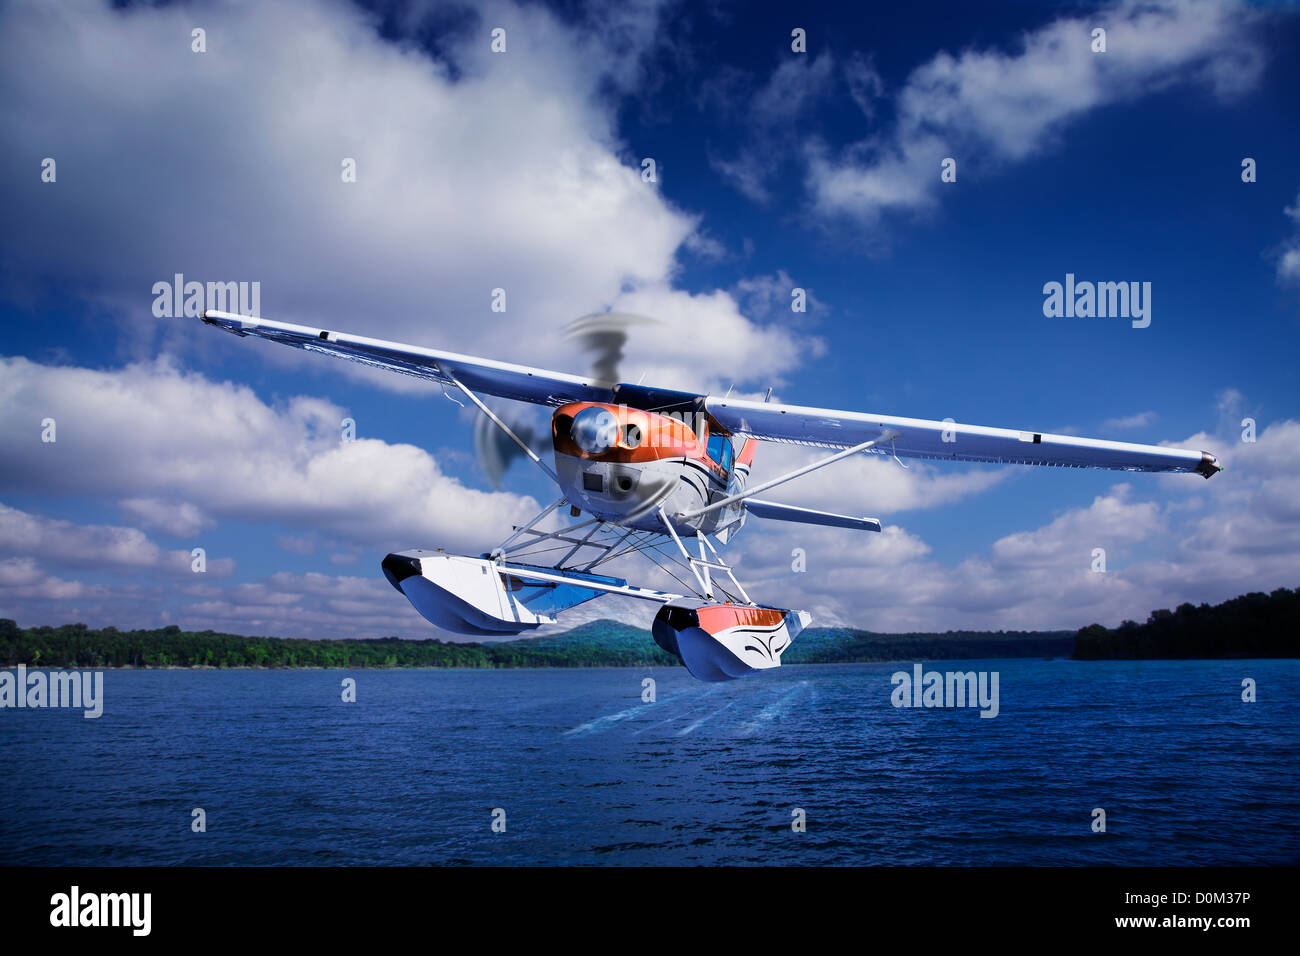 A Cessna 206 with floats takes off from a lake. Stock Photo